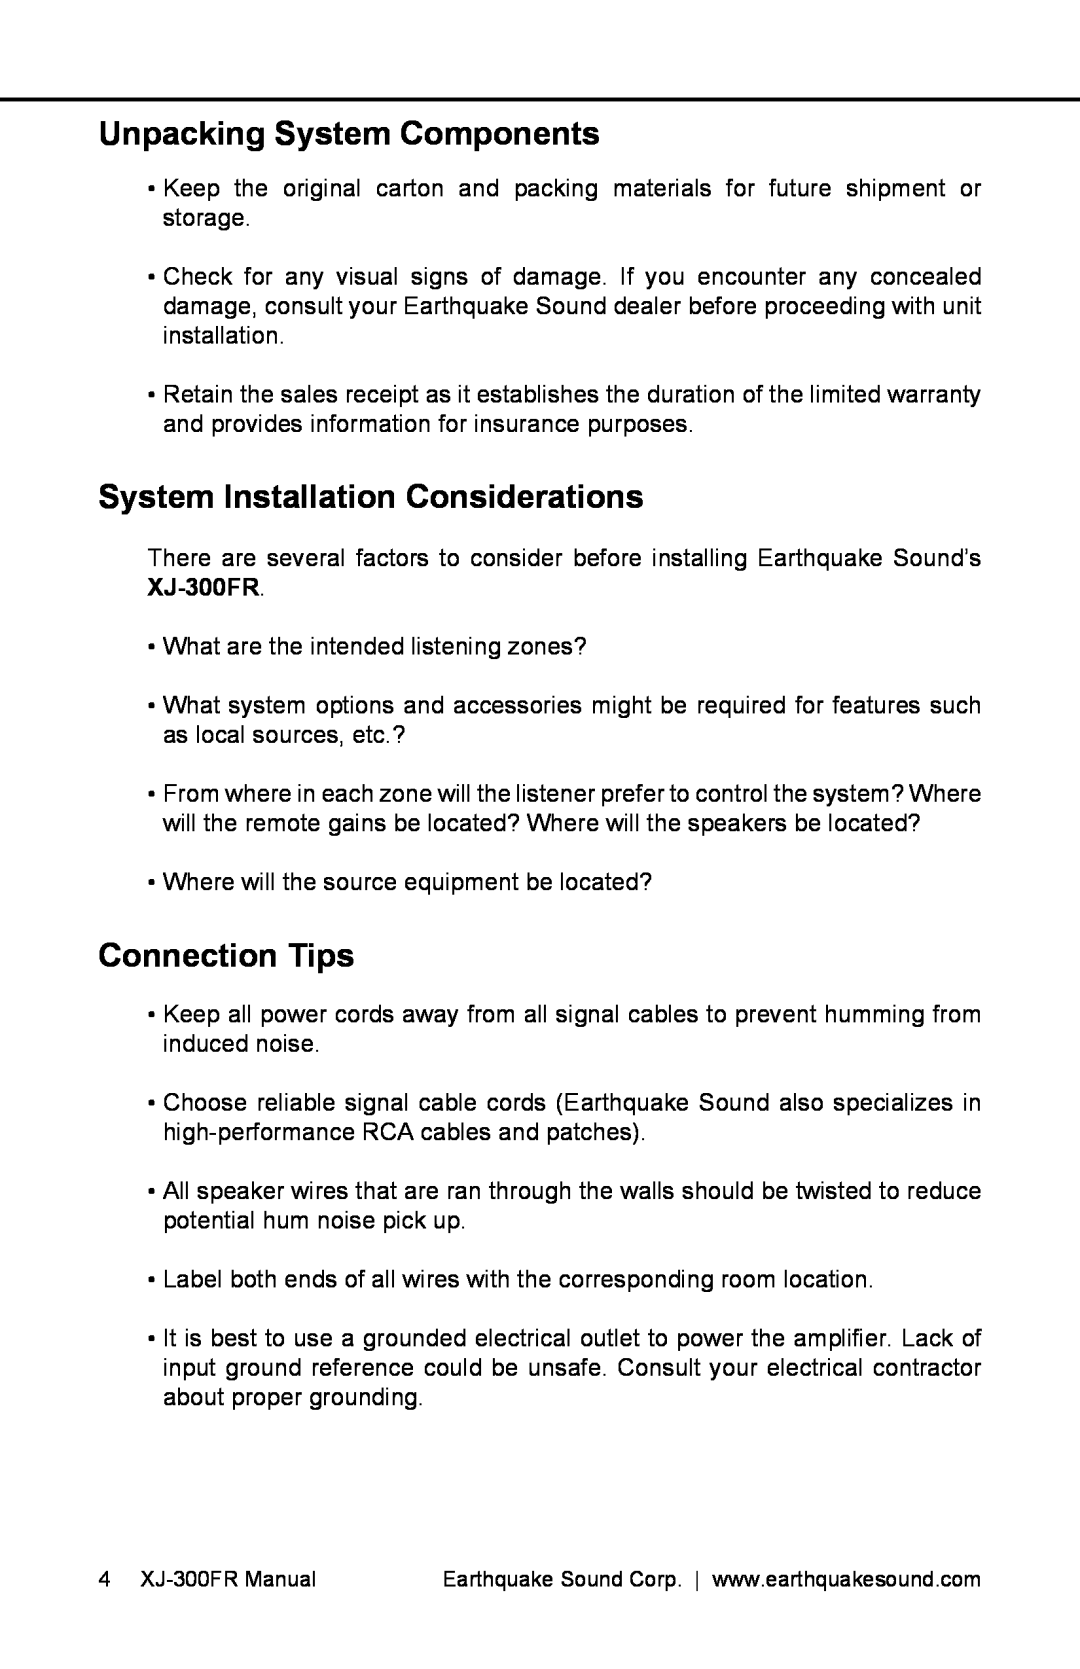 Earthquake Sound XJ-300 FR user manual Unpacking System Components, System Installation Considerations, Connection Tips 